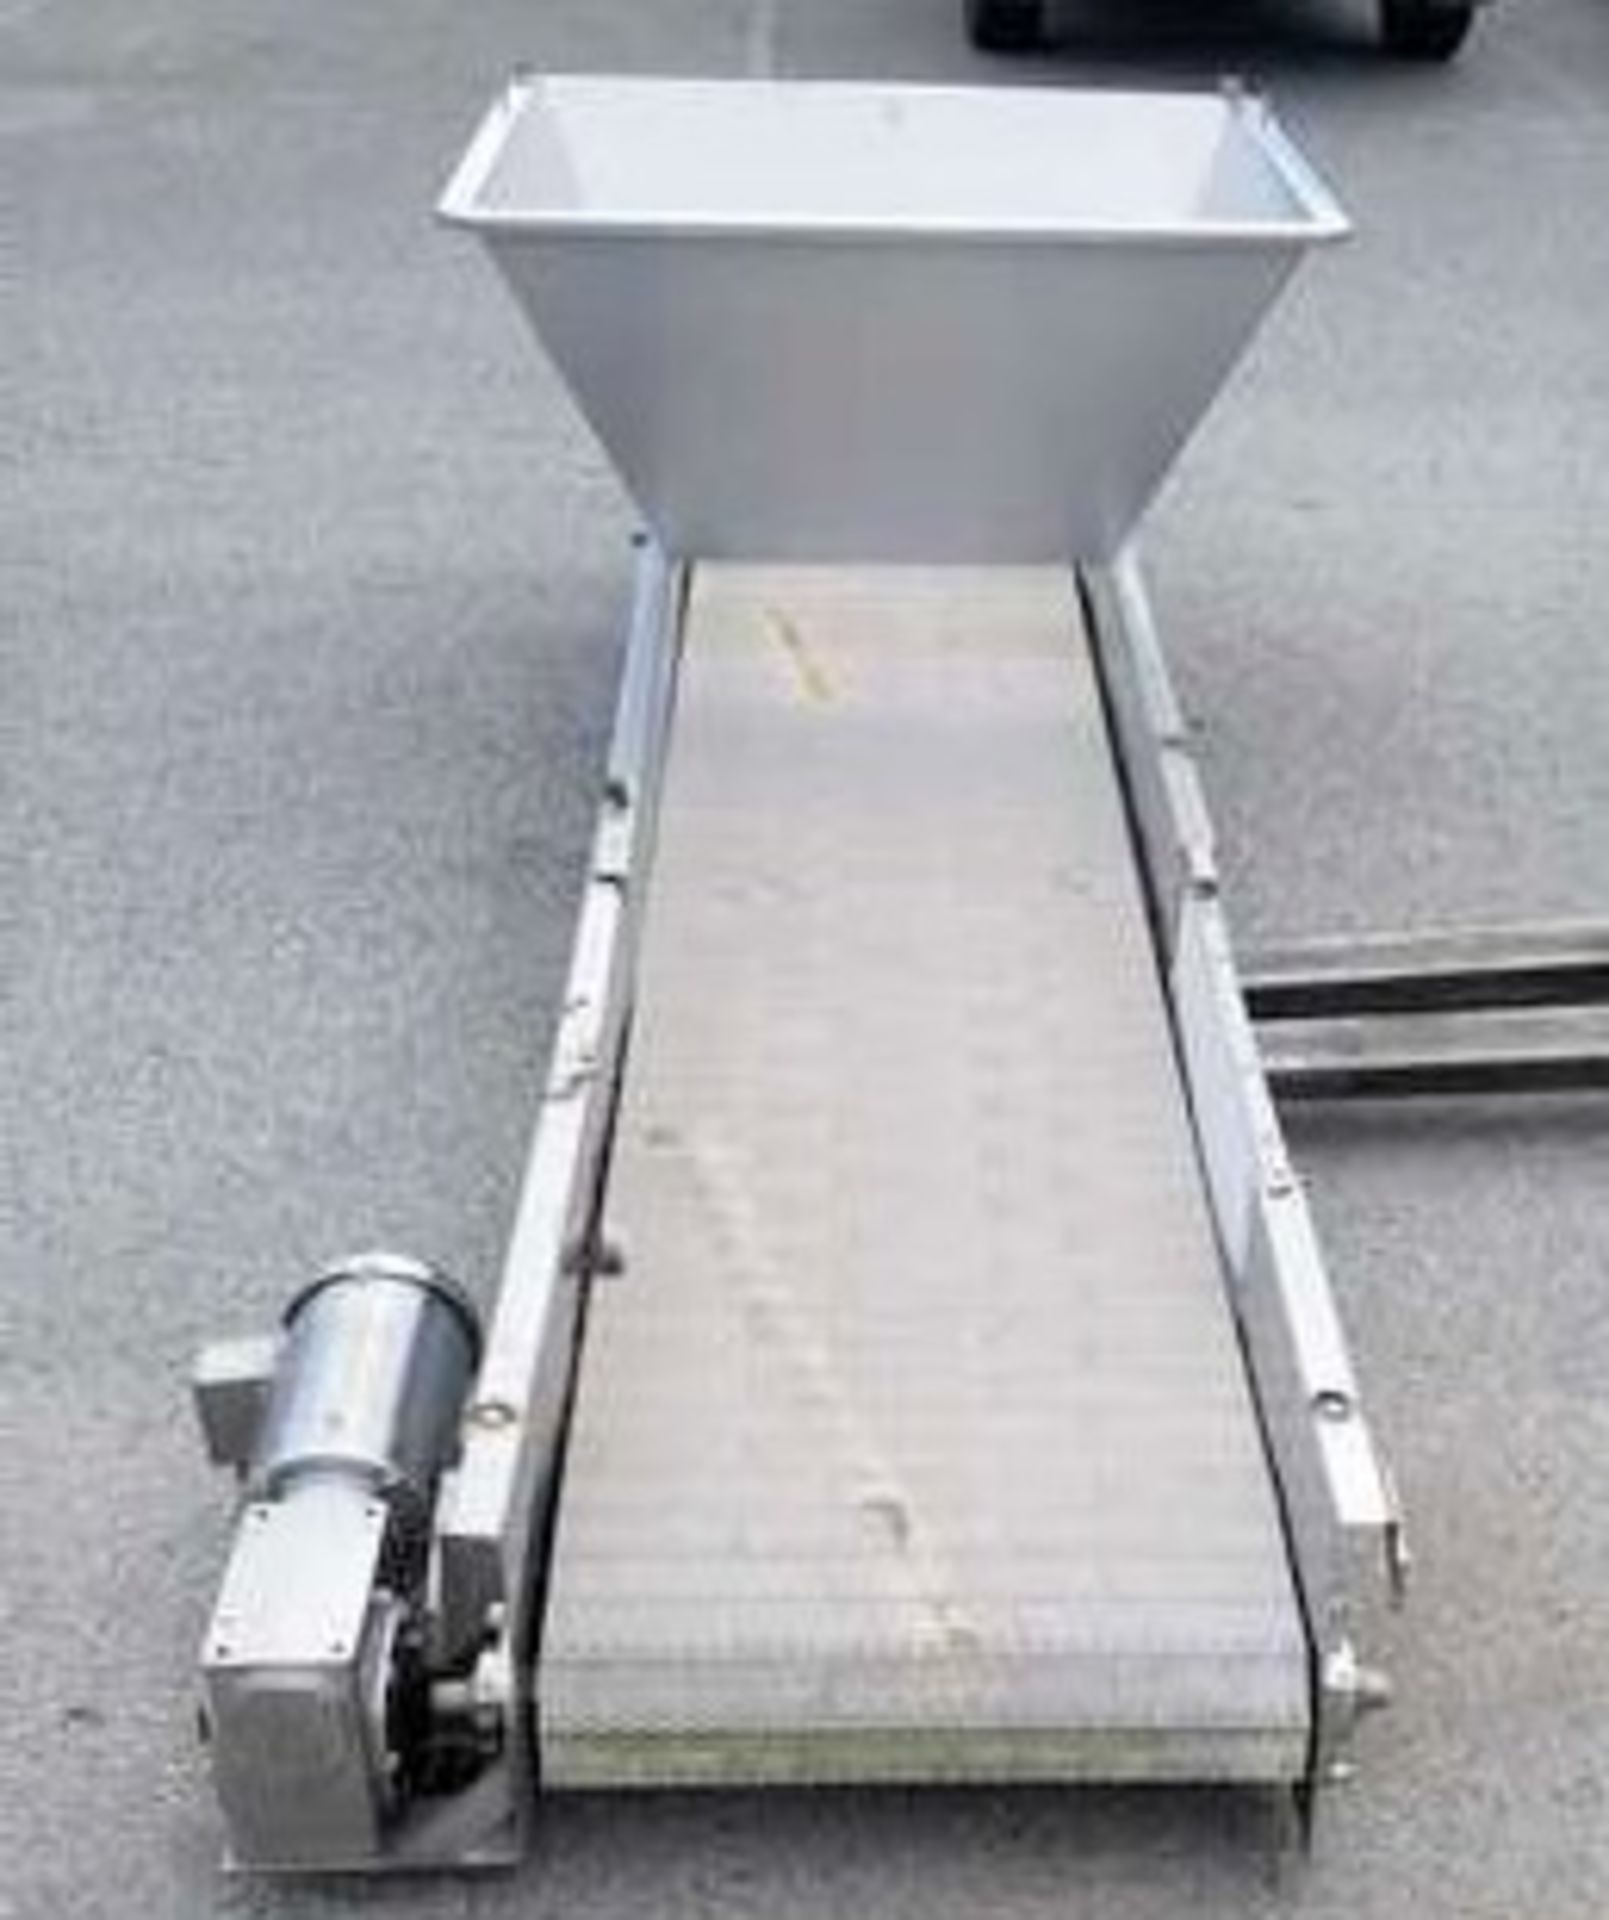 Flat UHMW belt S/S Conveyor with Hopper. 10'L x 24"W belt. Hopper is 17" in from infeed end. Product - Image 2 of 4